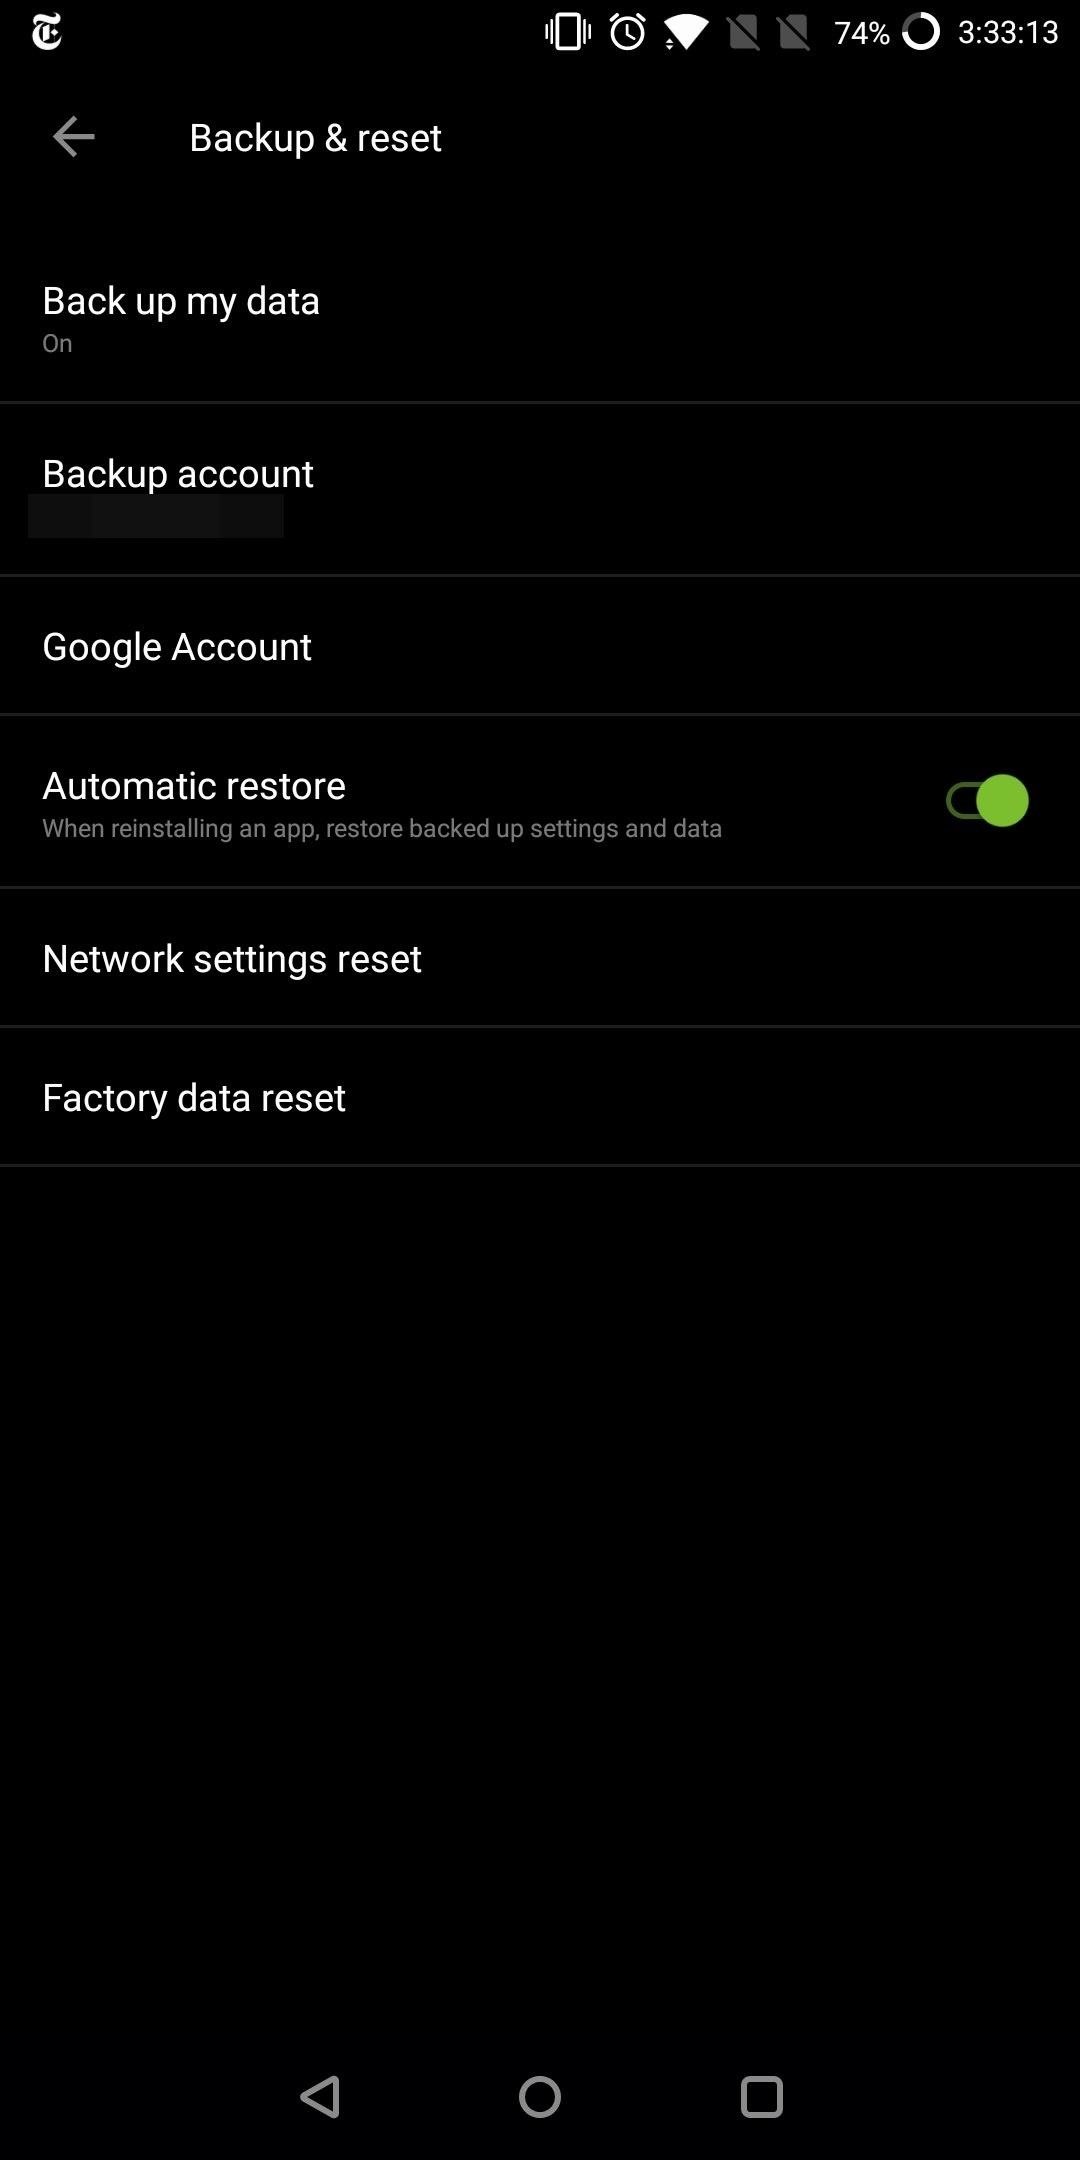 How to Get ALL of Your Data onto Your New Android Phone